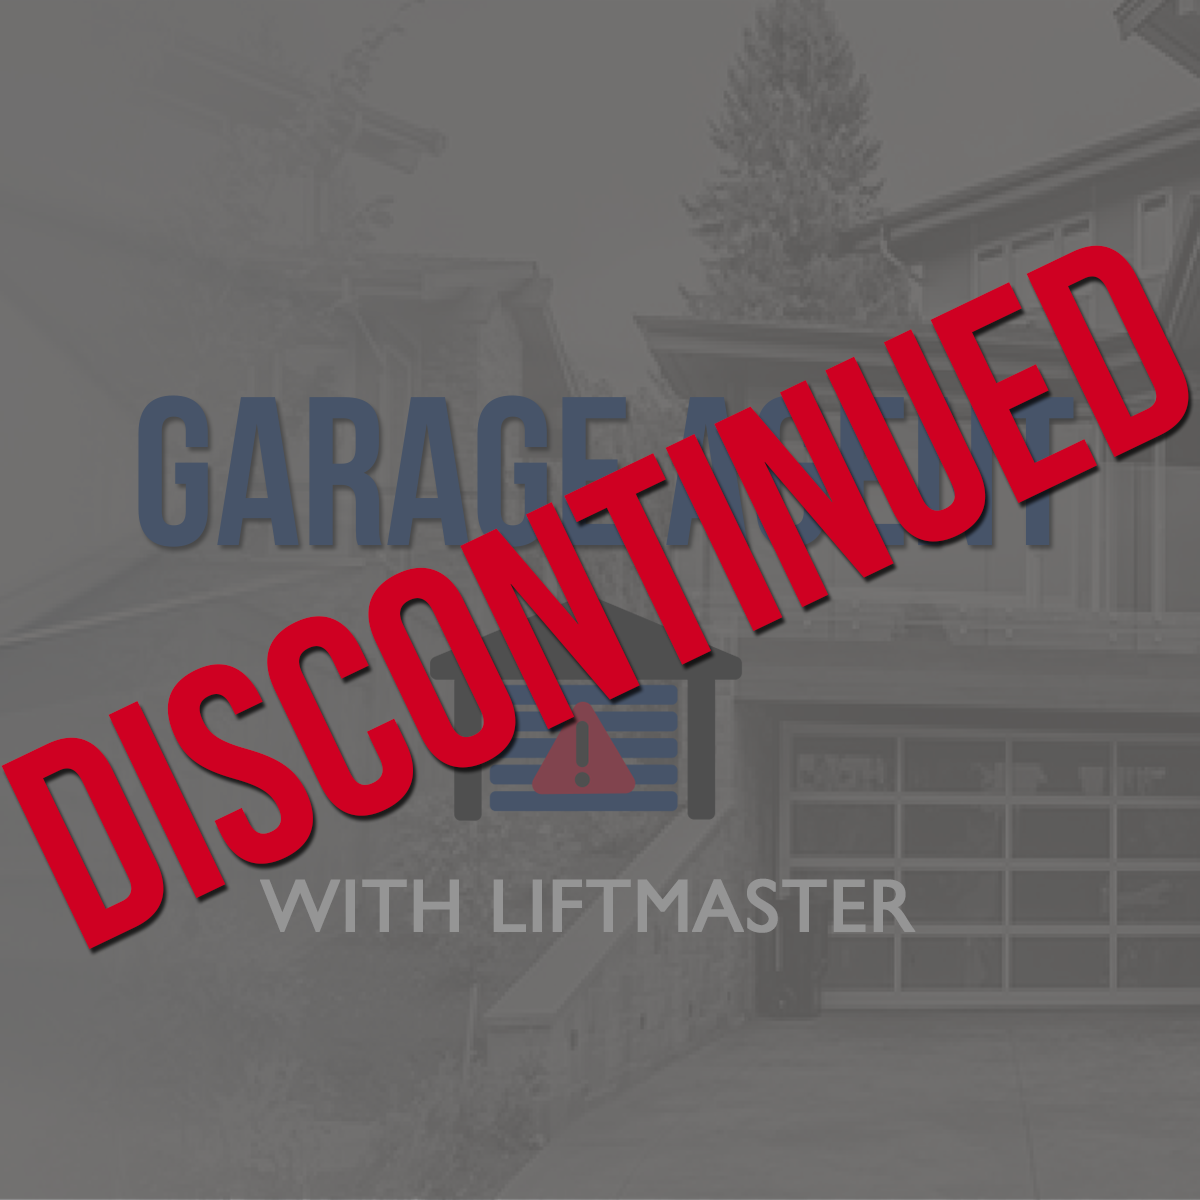 Garage Agent with LiftMaster Discontinued.png